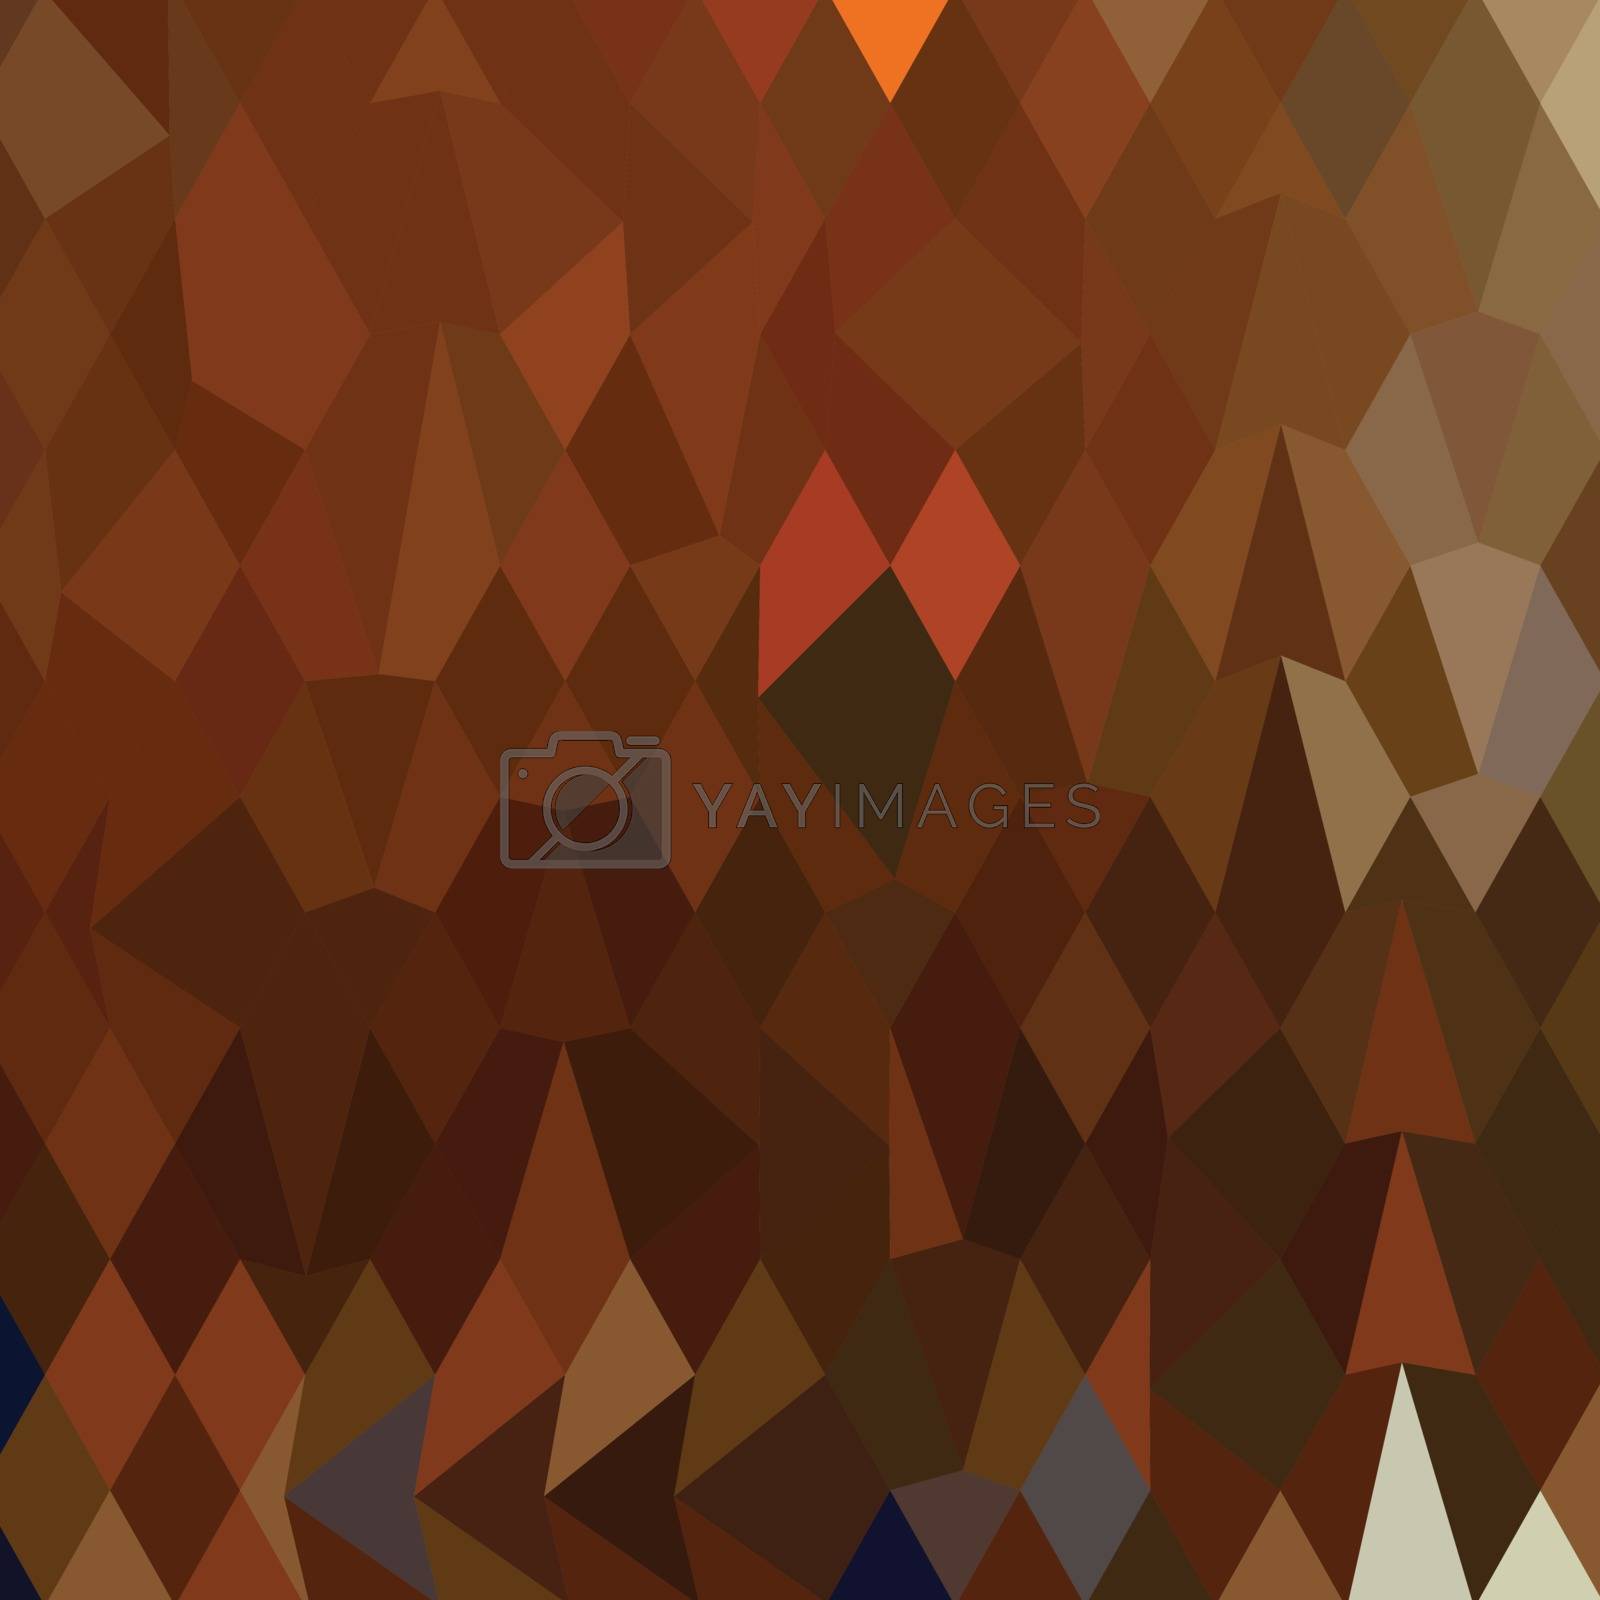 Royalty free image of Brown Forest Abstract Low Polygon Background by patrimonio